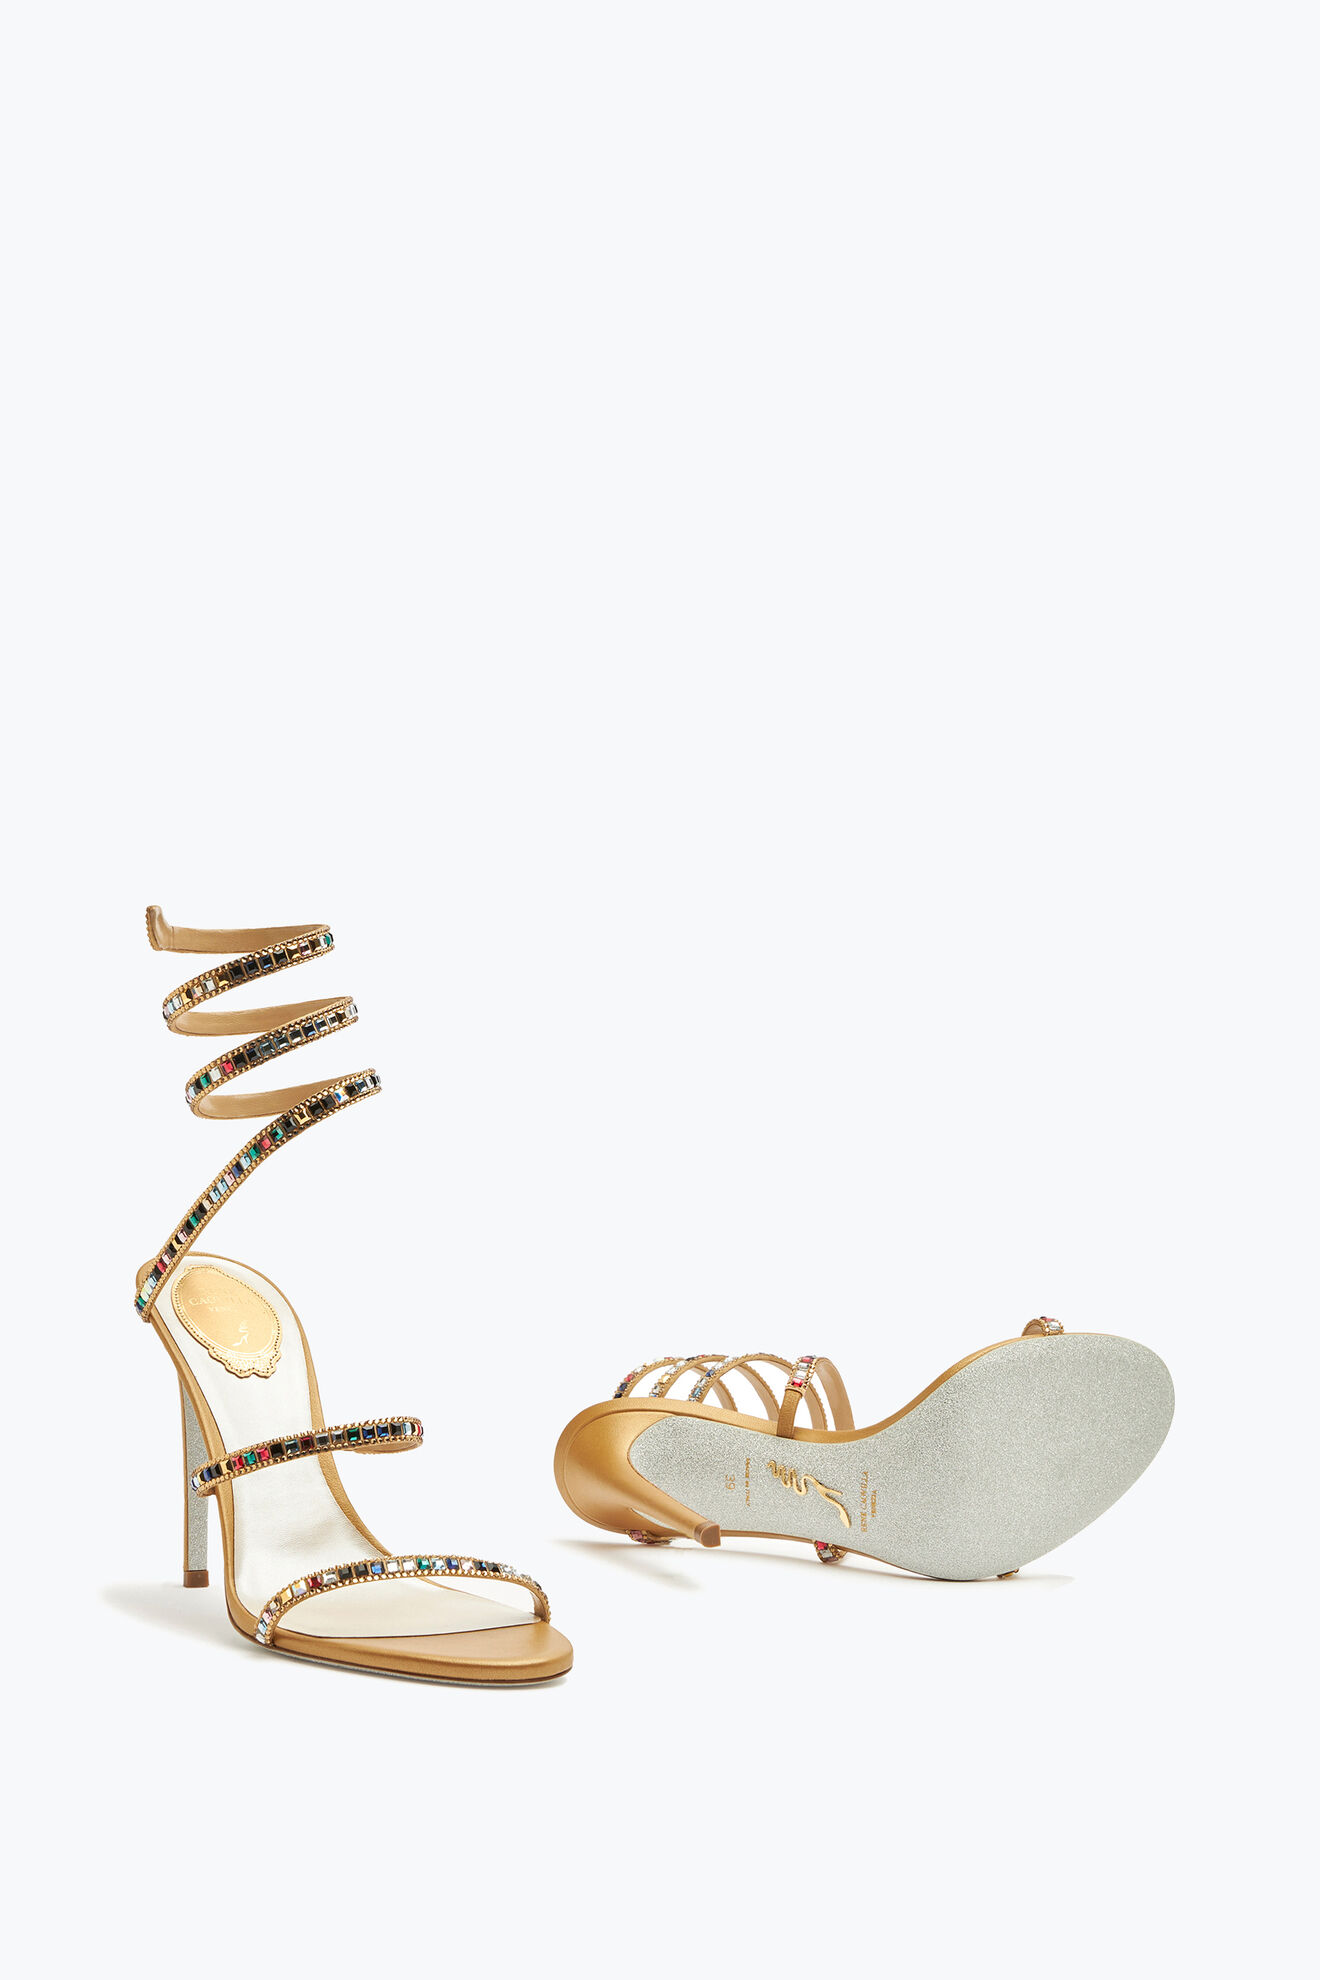 Cleo Crystal Gold Sandal 105 Sandals in Gold for Women | Rene Caovilla®